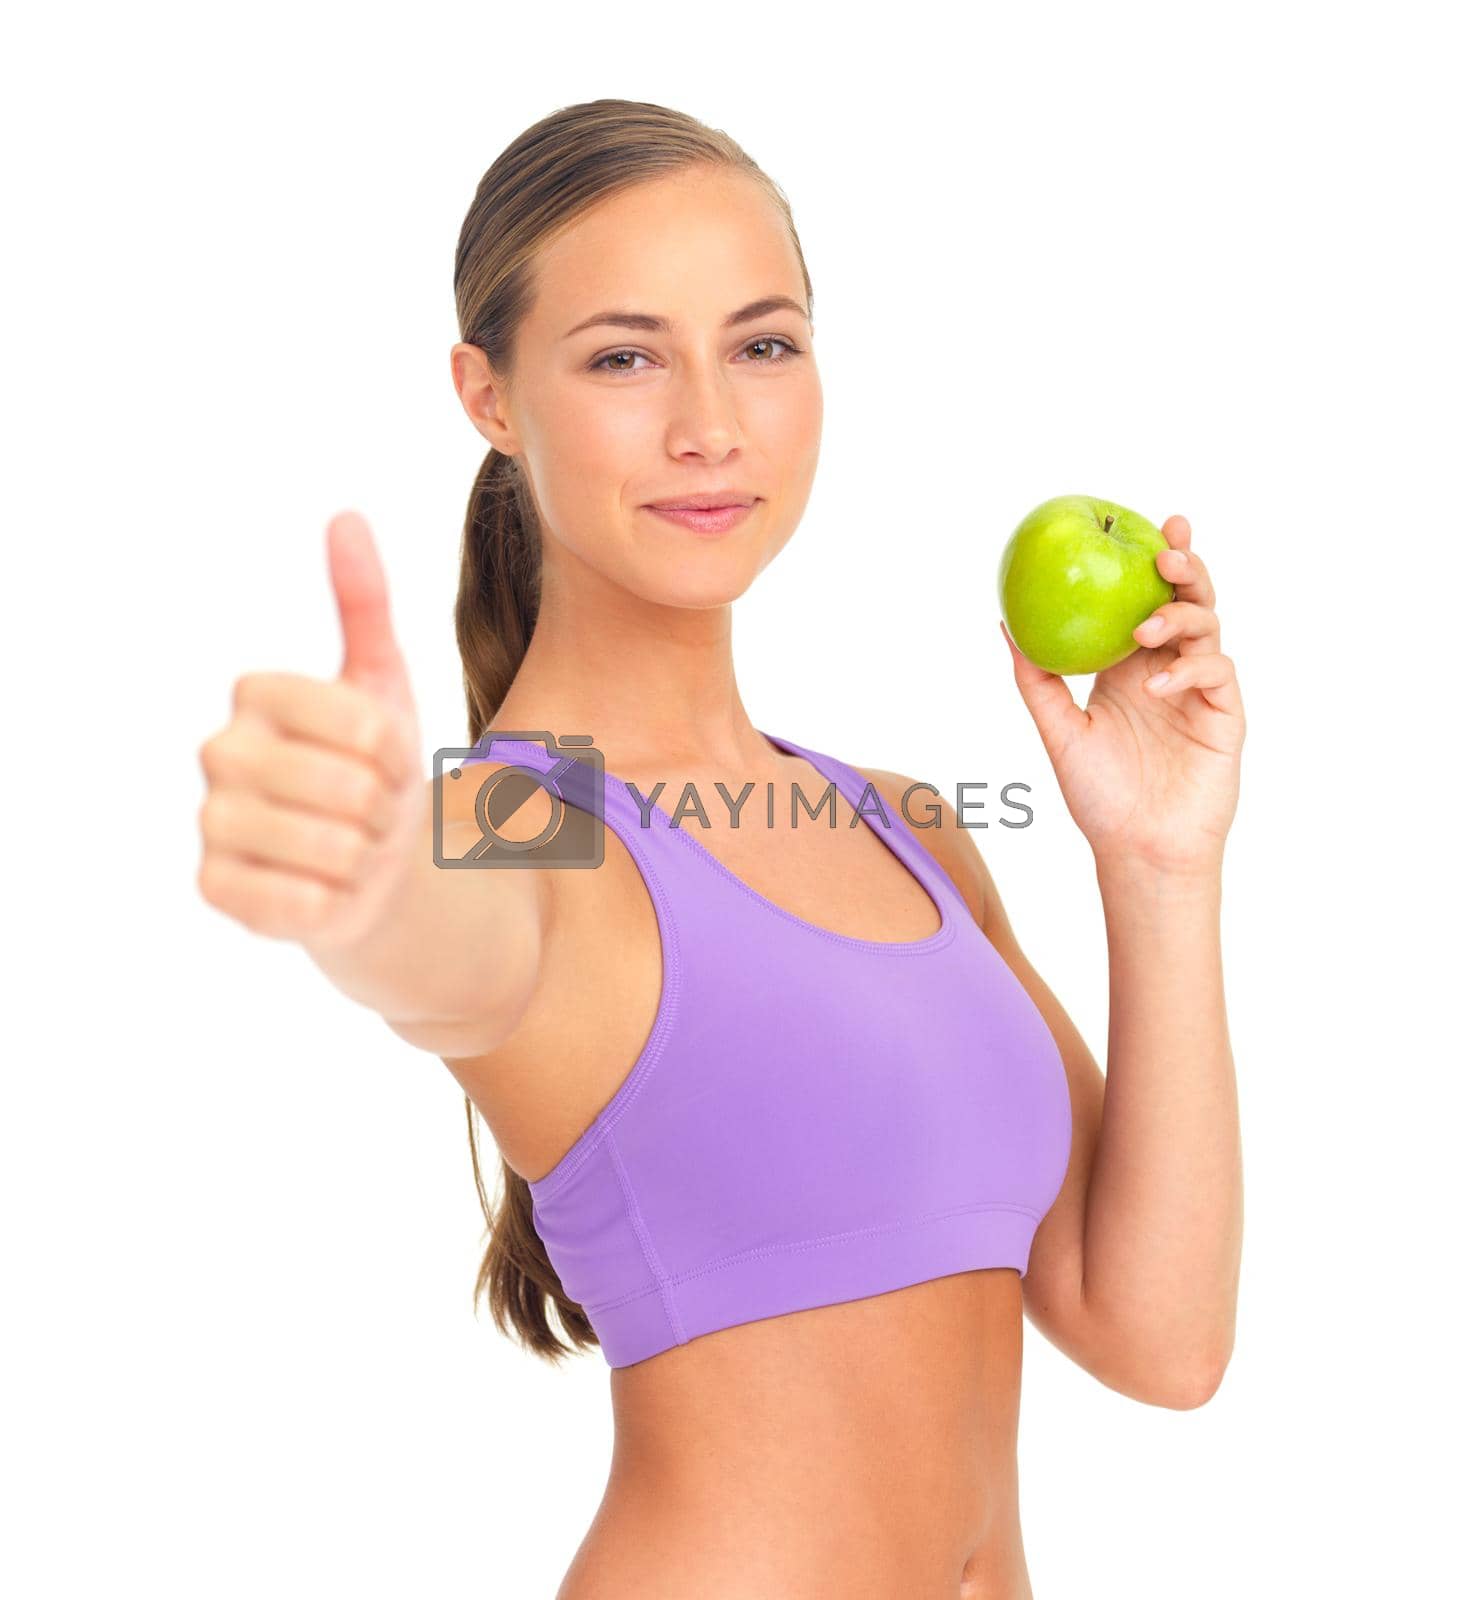 Royalty free image of Giving a big thumbs up to a healthy lifestyle. Studio portrait of a sporty young woman holding an apple and giving you the thumbs up. by YuriArcurs